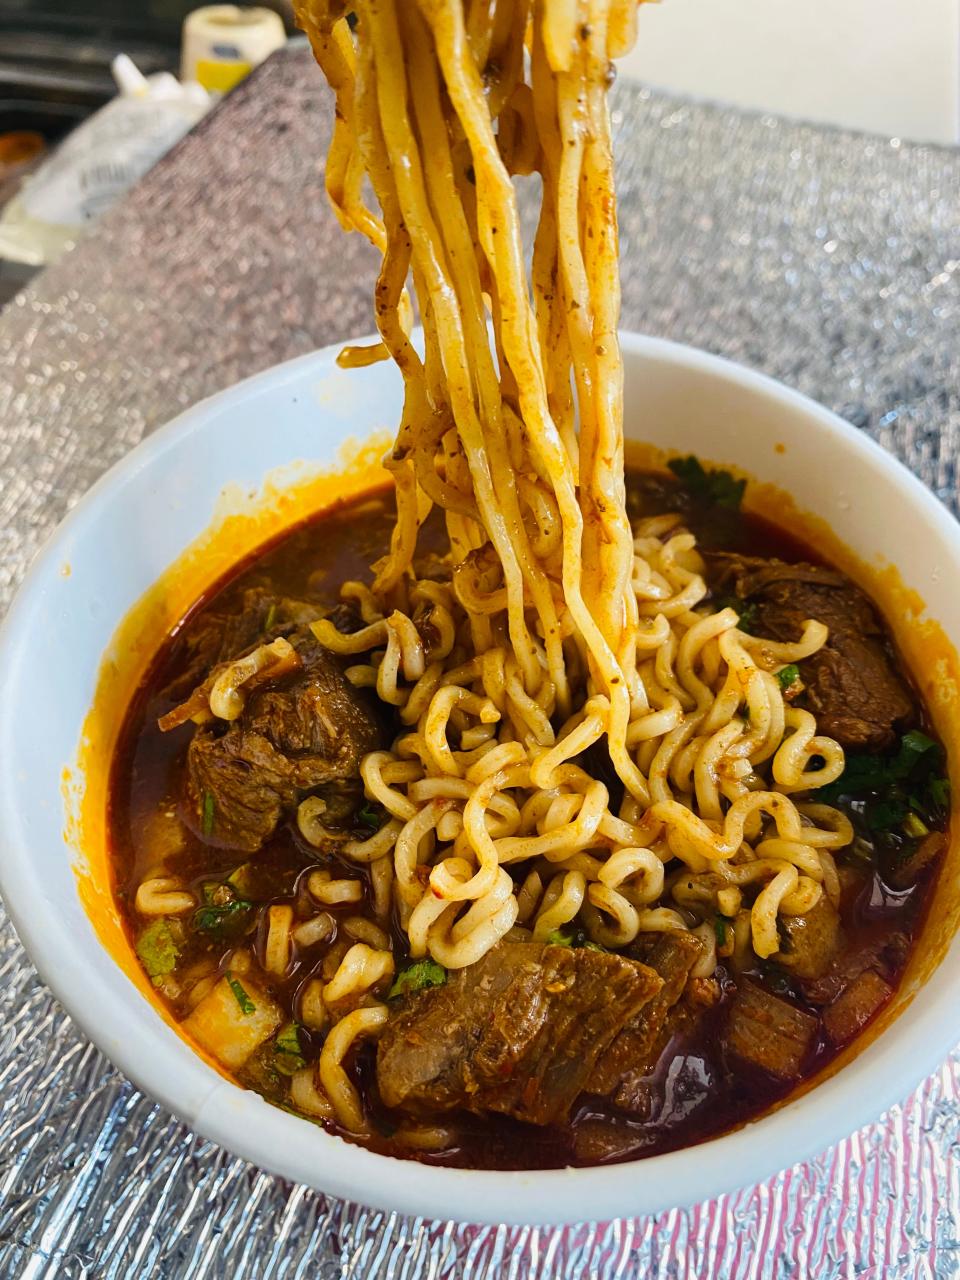 Birria ramen is one of the offerings at Romero’s Taco Truck. Romero’s owners plan to open Romero’s Restaurant and Bar at 4171 S. 76 St., Greenfield.